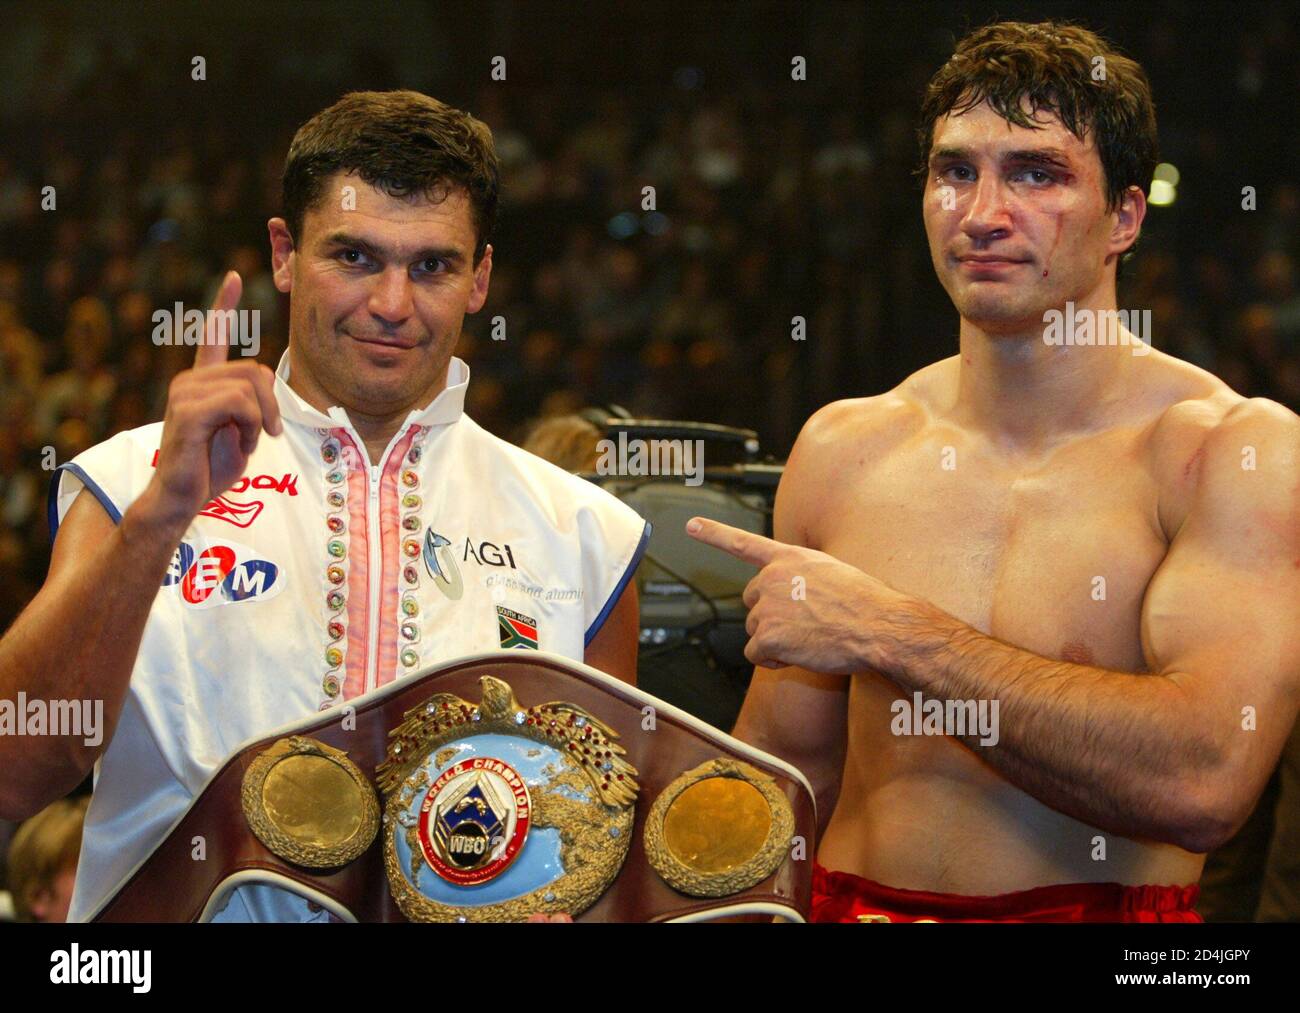 Former champion Wladimir Klitschko (R) on new WBO heavyweight champion Corrie Sanders of South after WBO title fight at the Preussag Arena in Hanover on March 8, 2003. Sanders beat